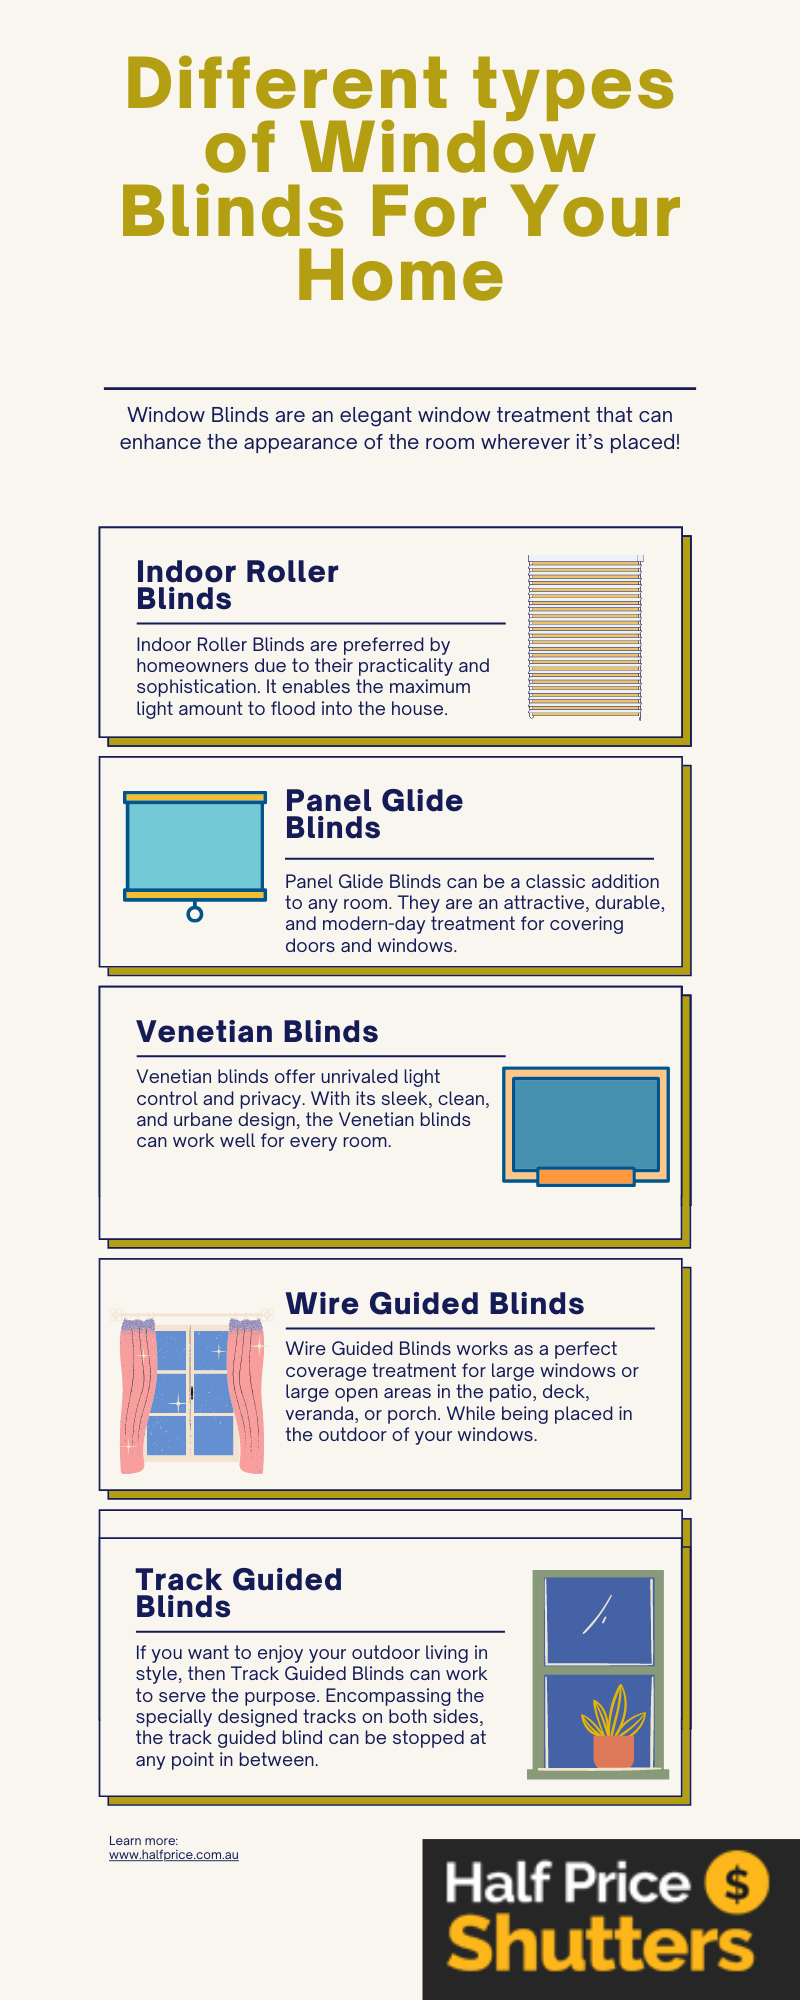 Different types of Window Blinds For Your Home